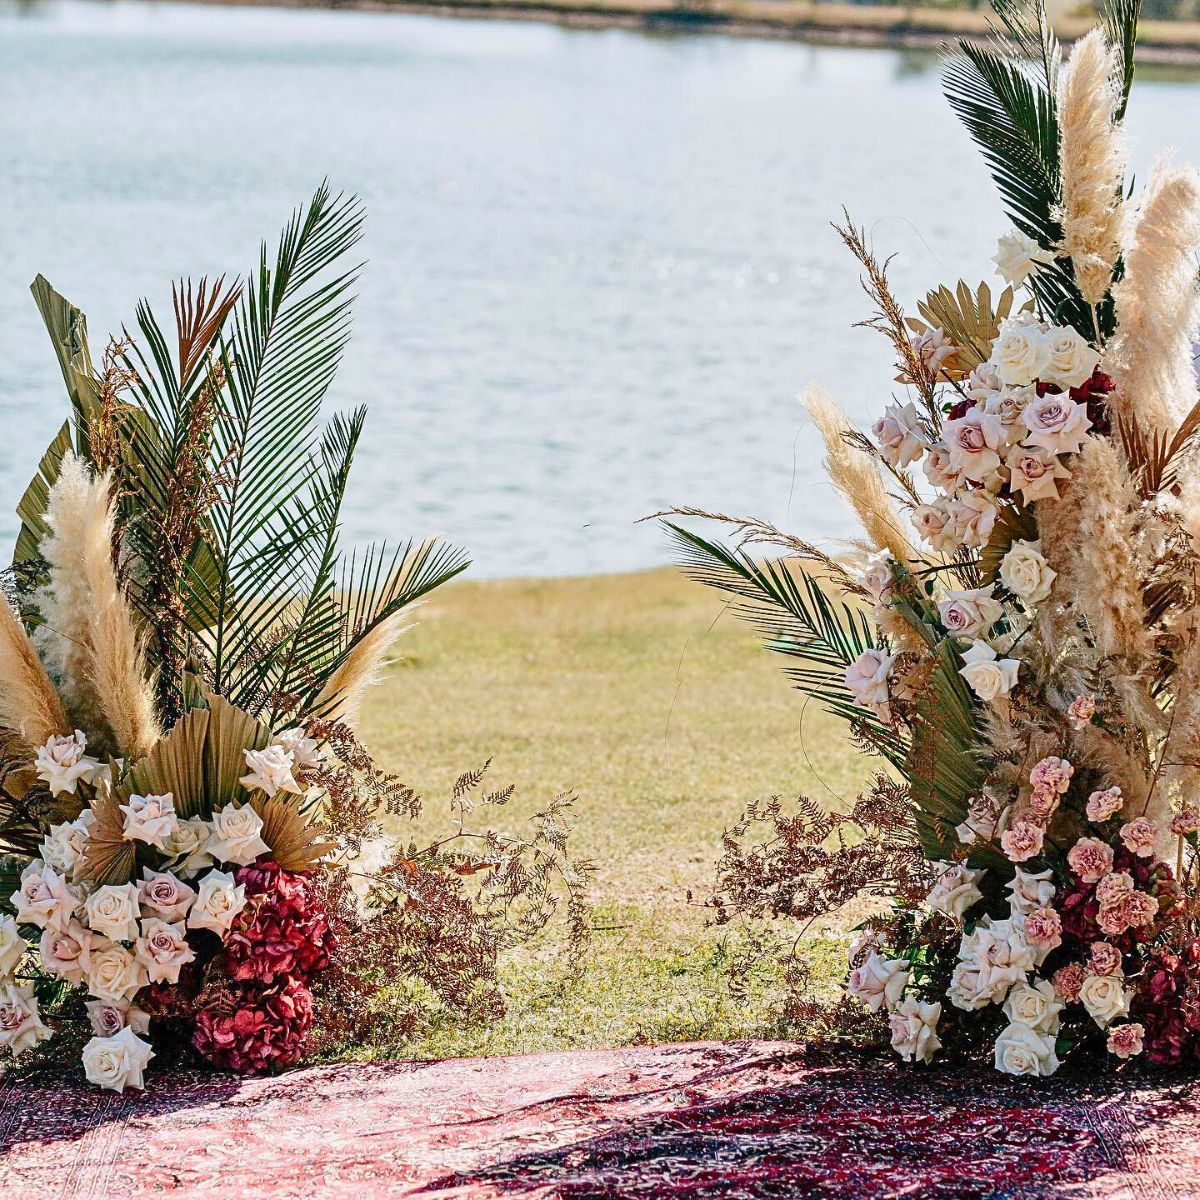 Ways to Make Your Wedding Flowers More Sustainable